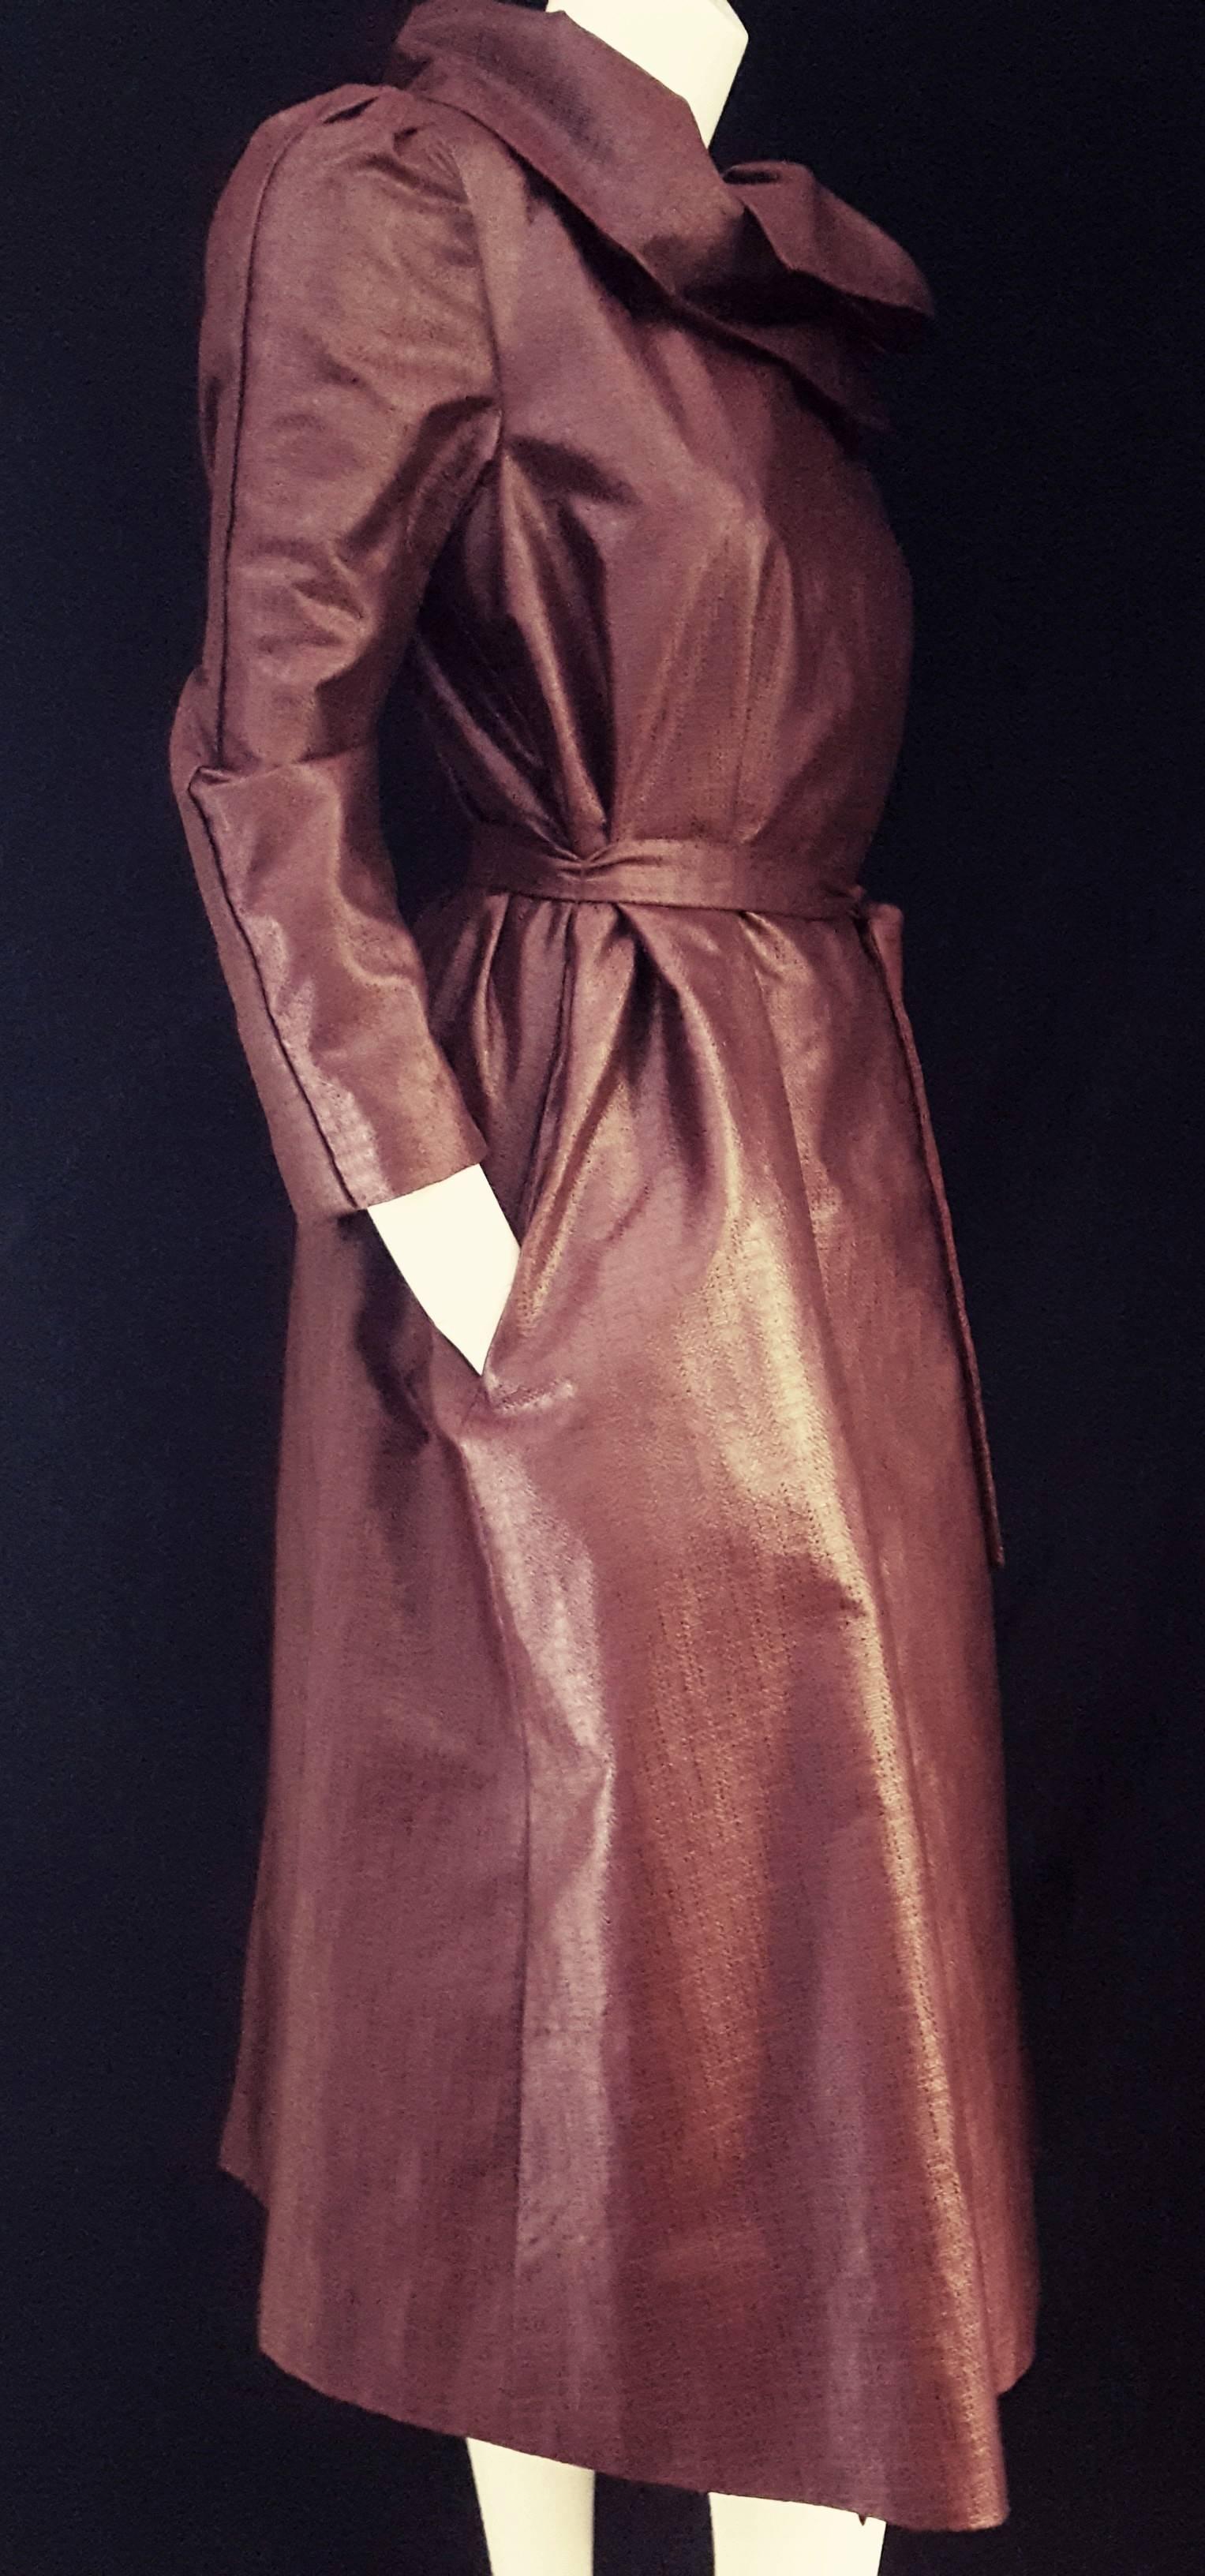 This vintage Pauline Trigere light weather coat is a combination of burgundy and black brocade and features an outstanding convertible collar with 3 buttons that can be worn open or closed for 2 different effects.  The coat is made of a light fabric